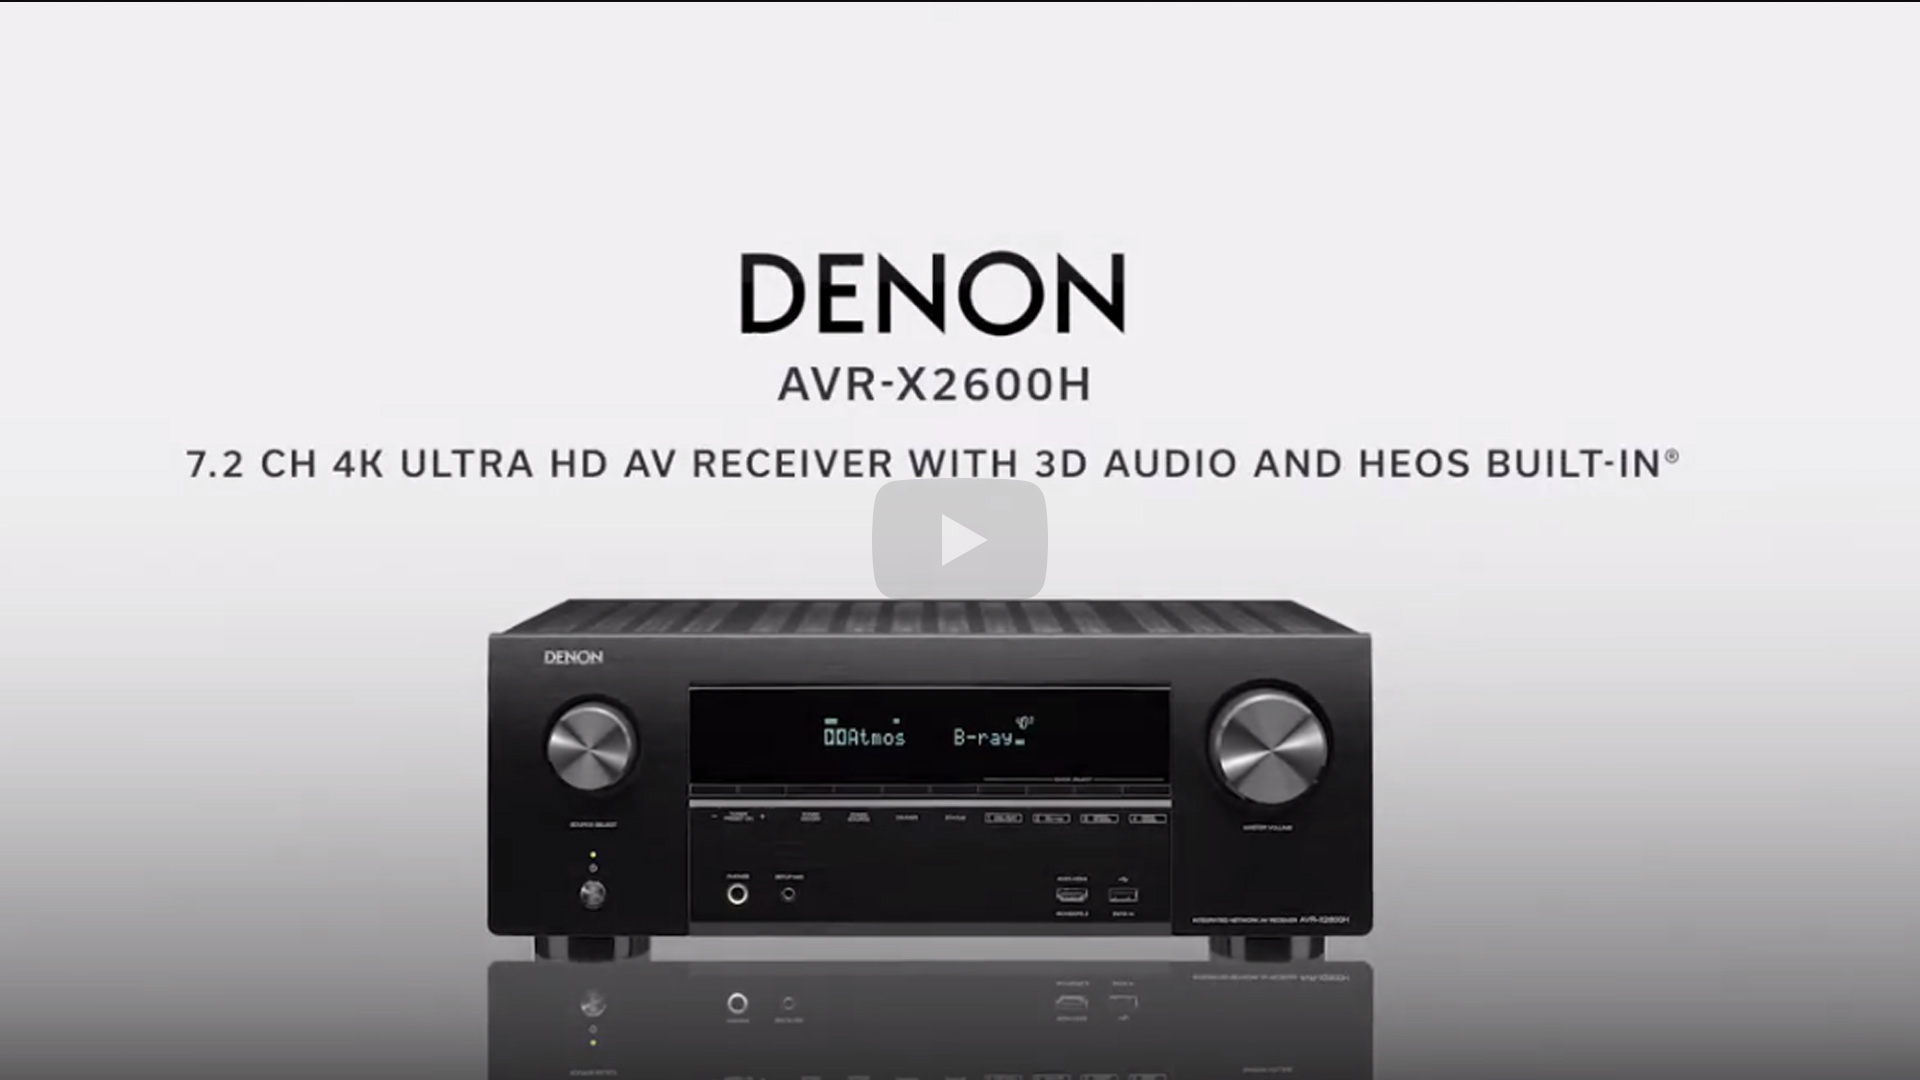 7.2 Channel New Dolby Atmos Height Virtualization 8 HDMI Inputs AirPlay 2 Dual Subwoofer Outputs 95W Each 2019 Model Denon AVR-X2600H 4K UHD AV Receiver 2 Outputs with eARC Alexa & HEOS 